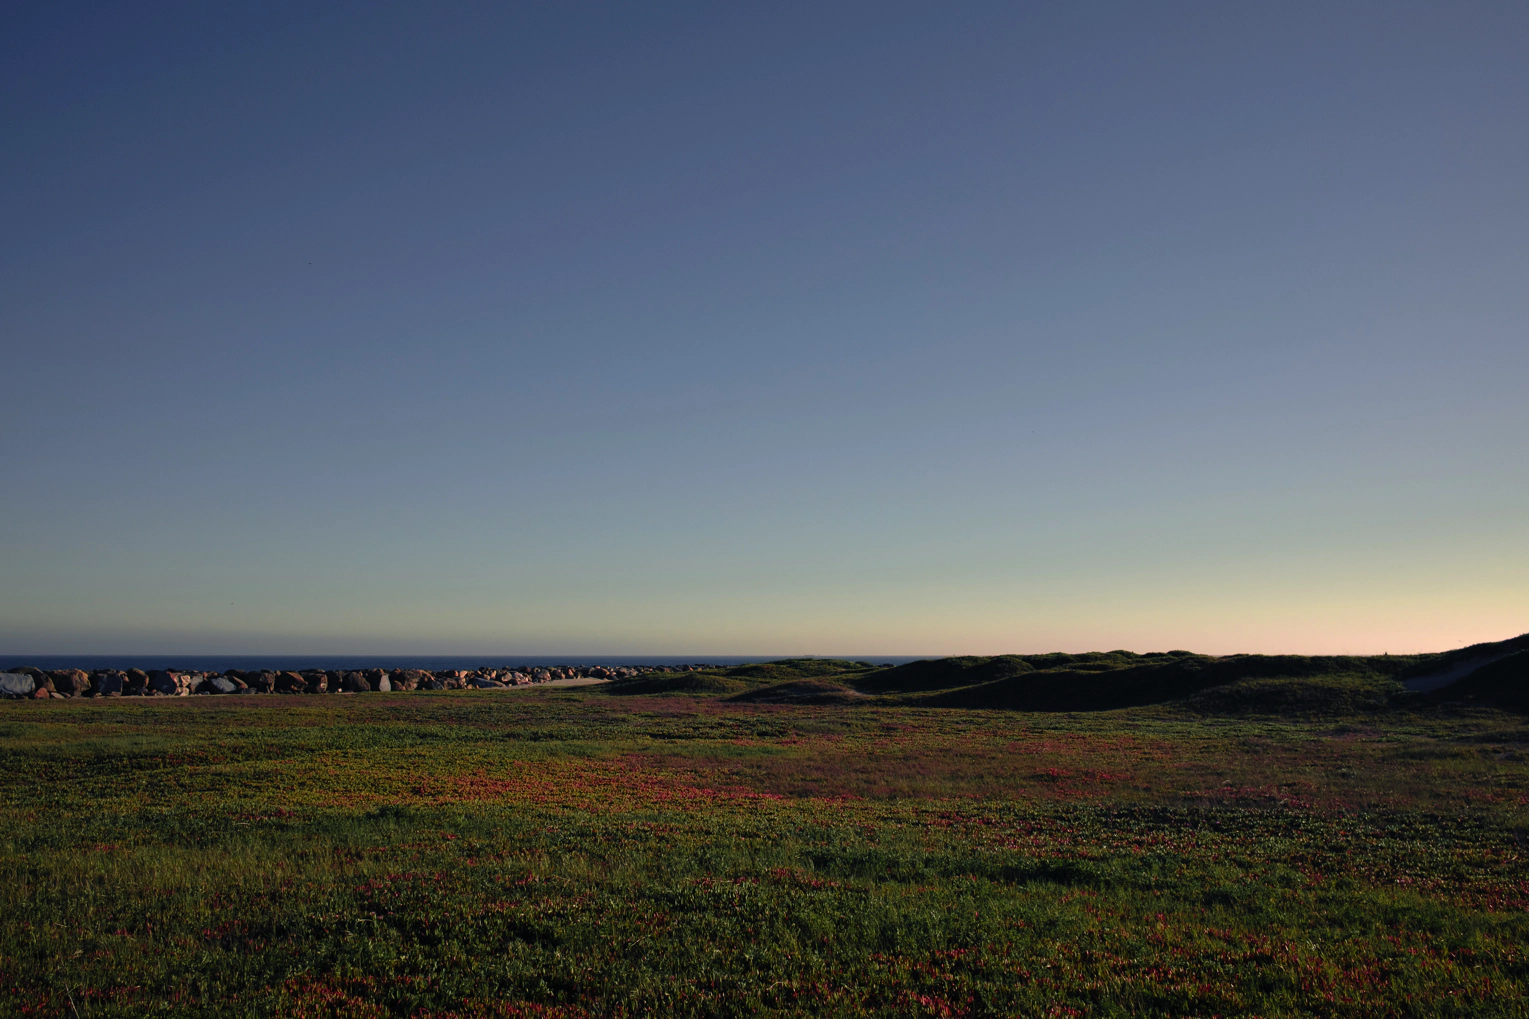 A grassy field with the sea in the horizon. A hint of red flowers in the middle.